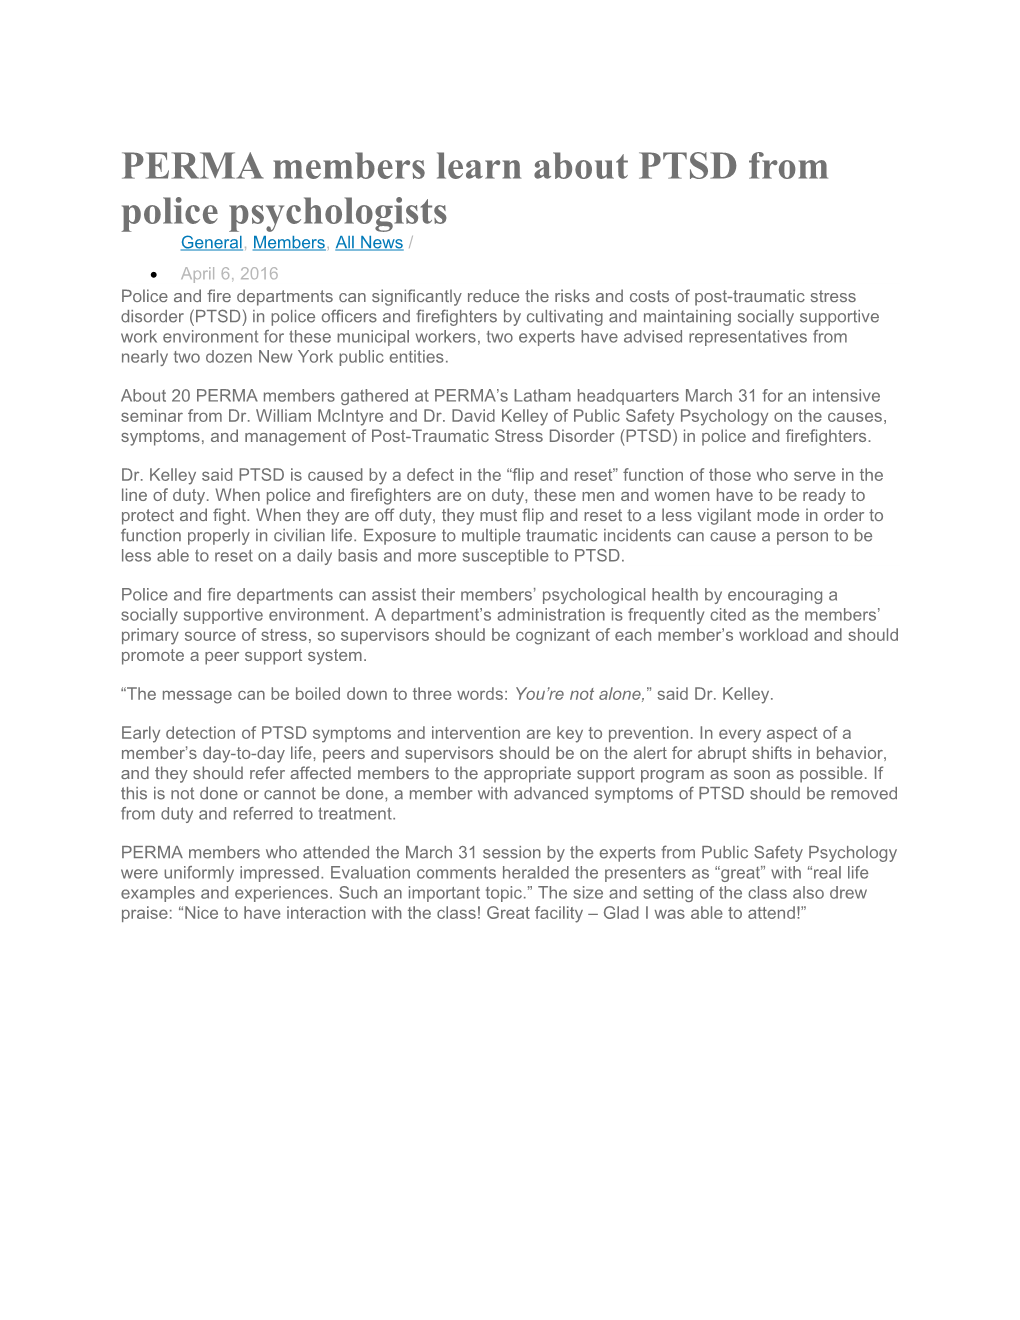 PERMA Members Learn About PTSD from Police Psychologists